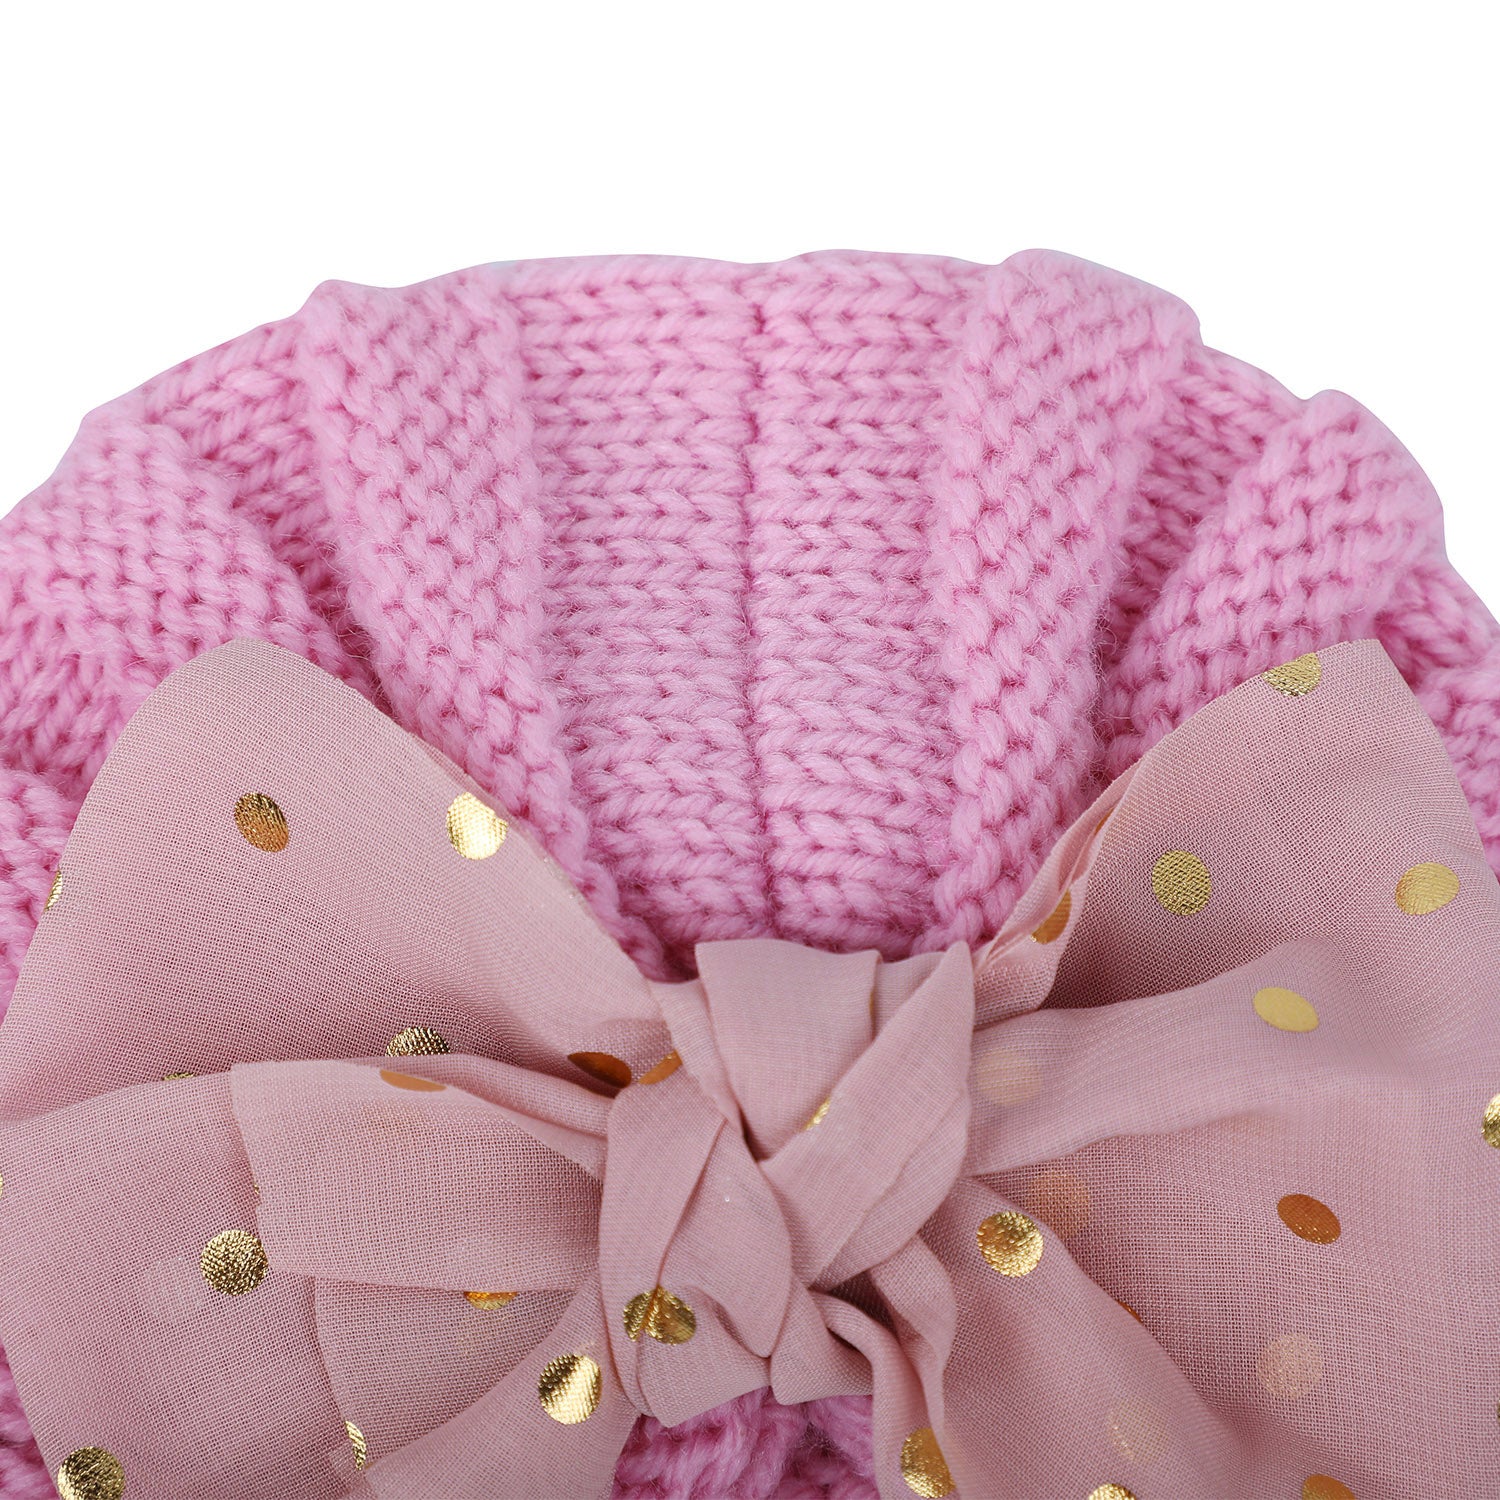 Baby Moo Partywear Sequence Bow 2 Pack Turban Caps - Black And Pink - Baby Moo